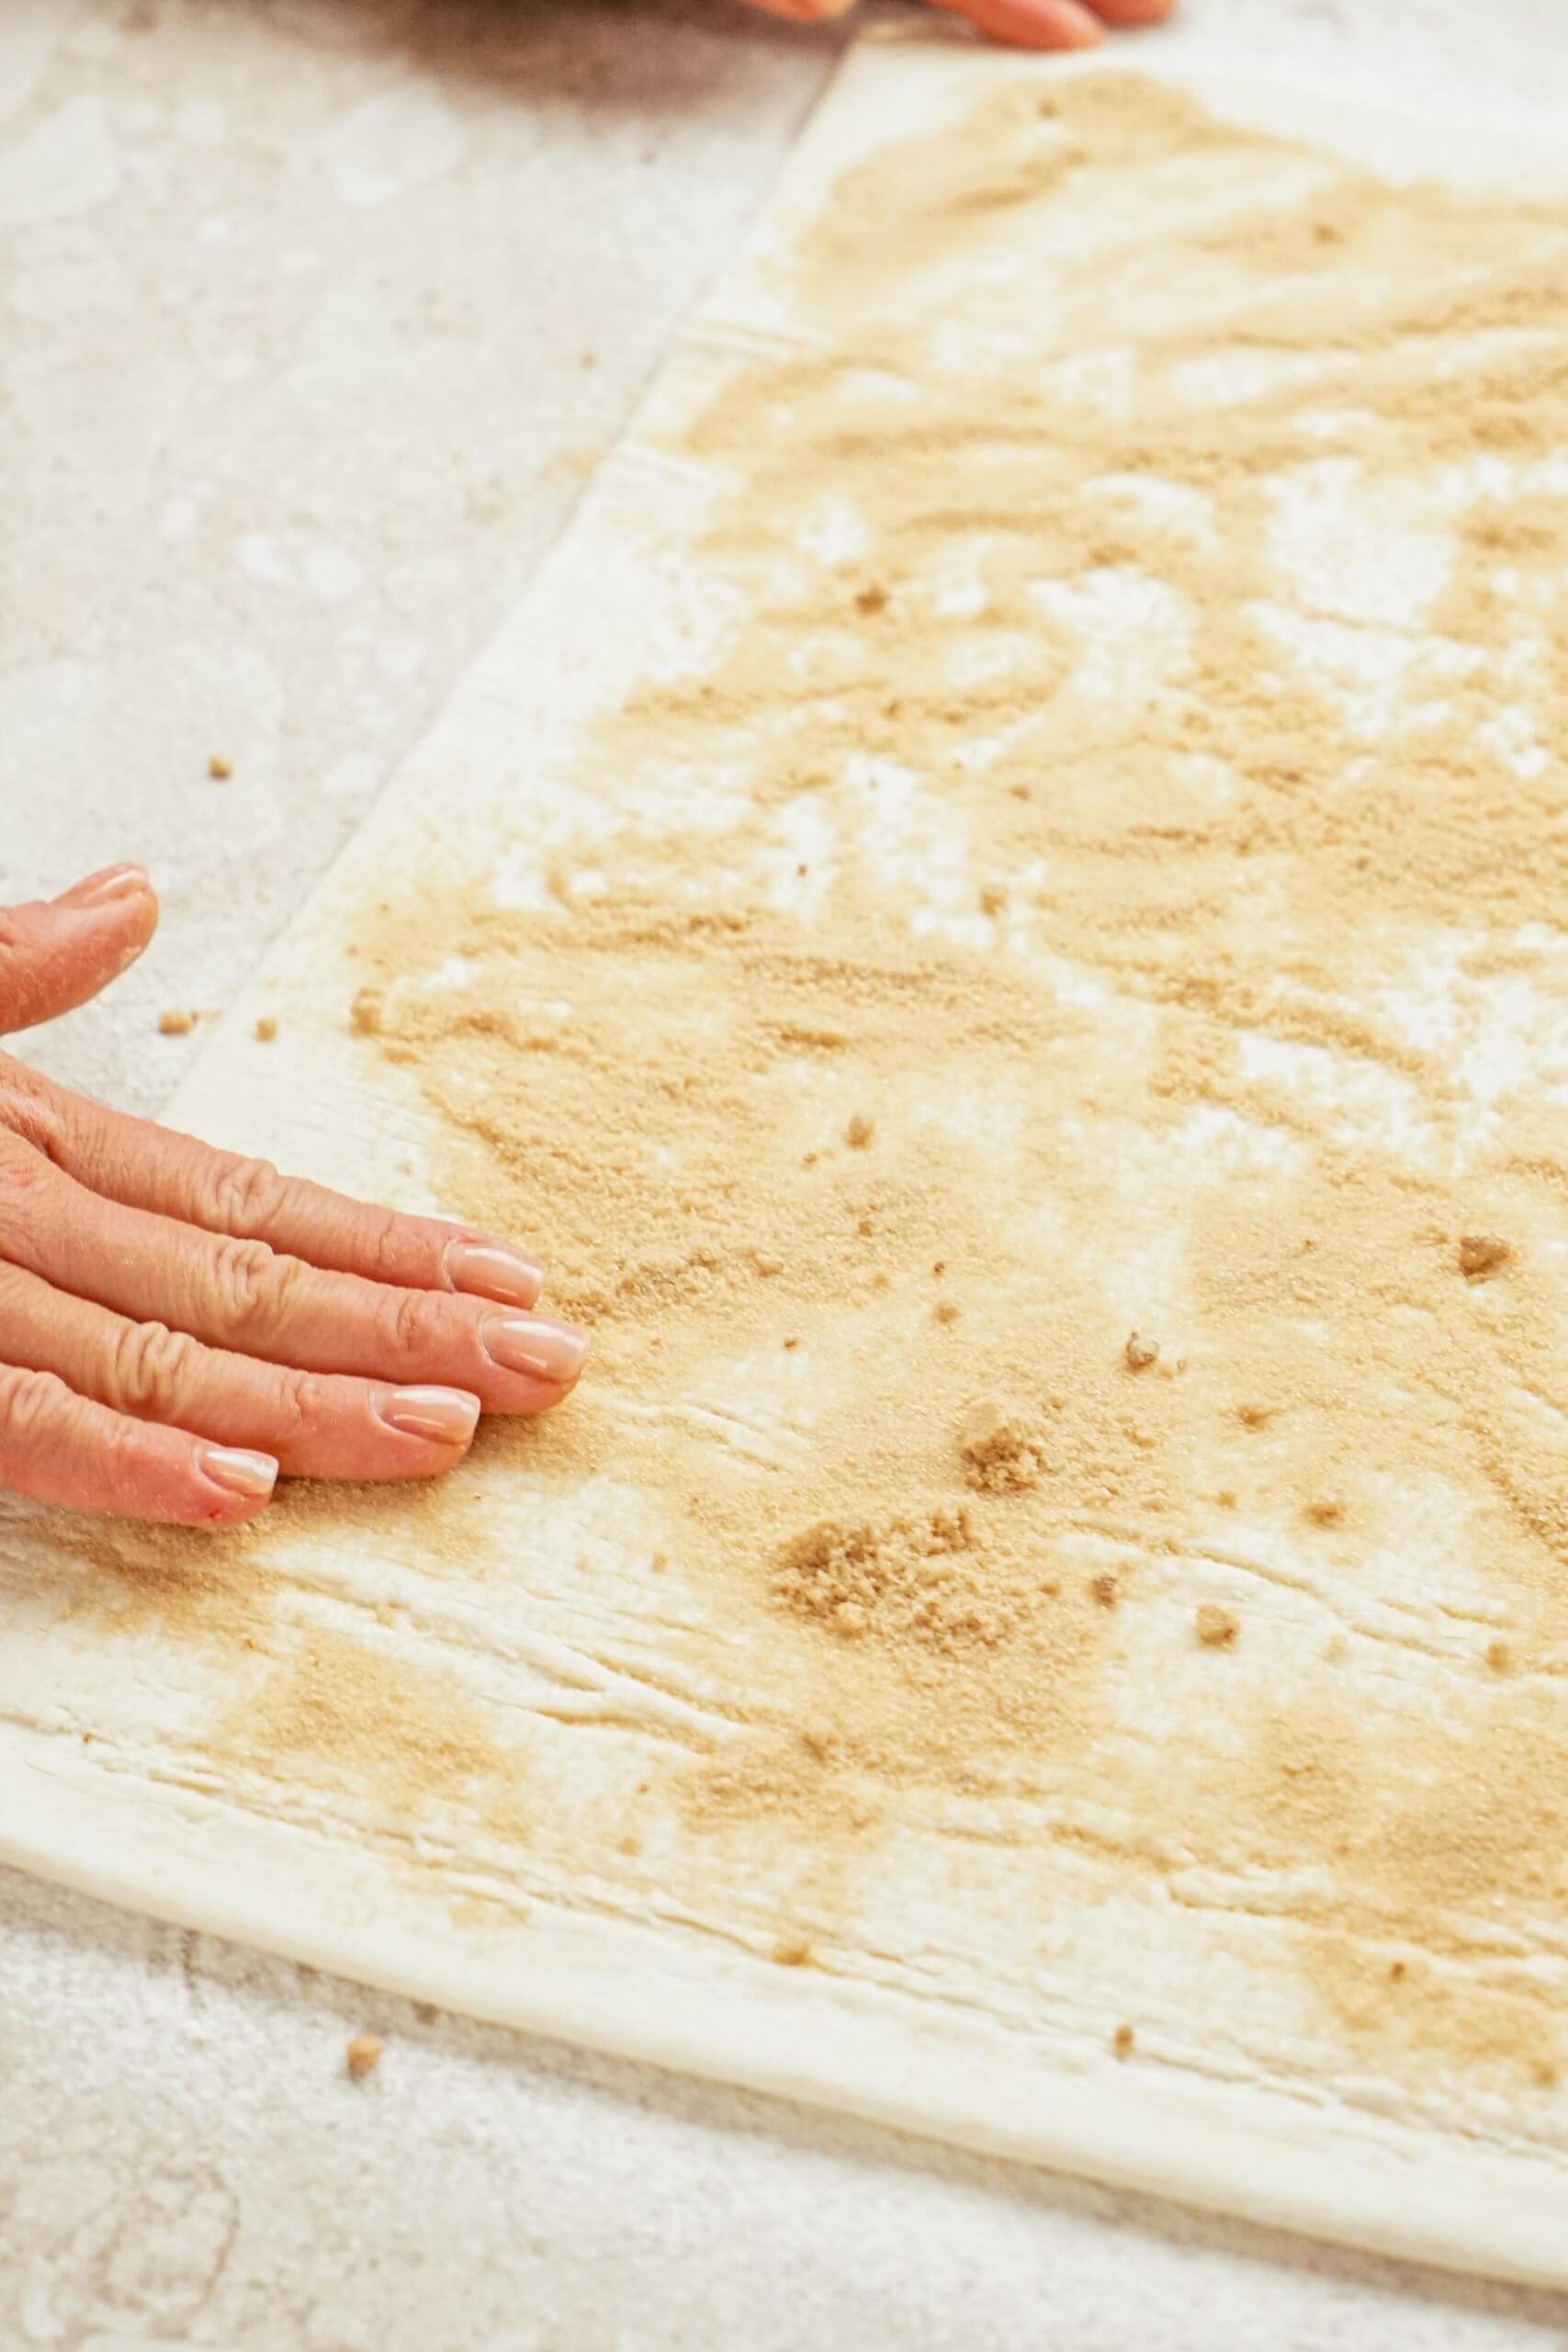 Woman's hand pressing brown sugar and cinnamon mixture onto Puff Pastry sheet